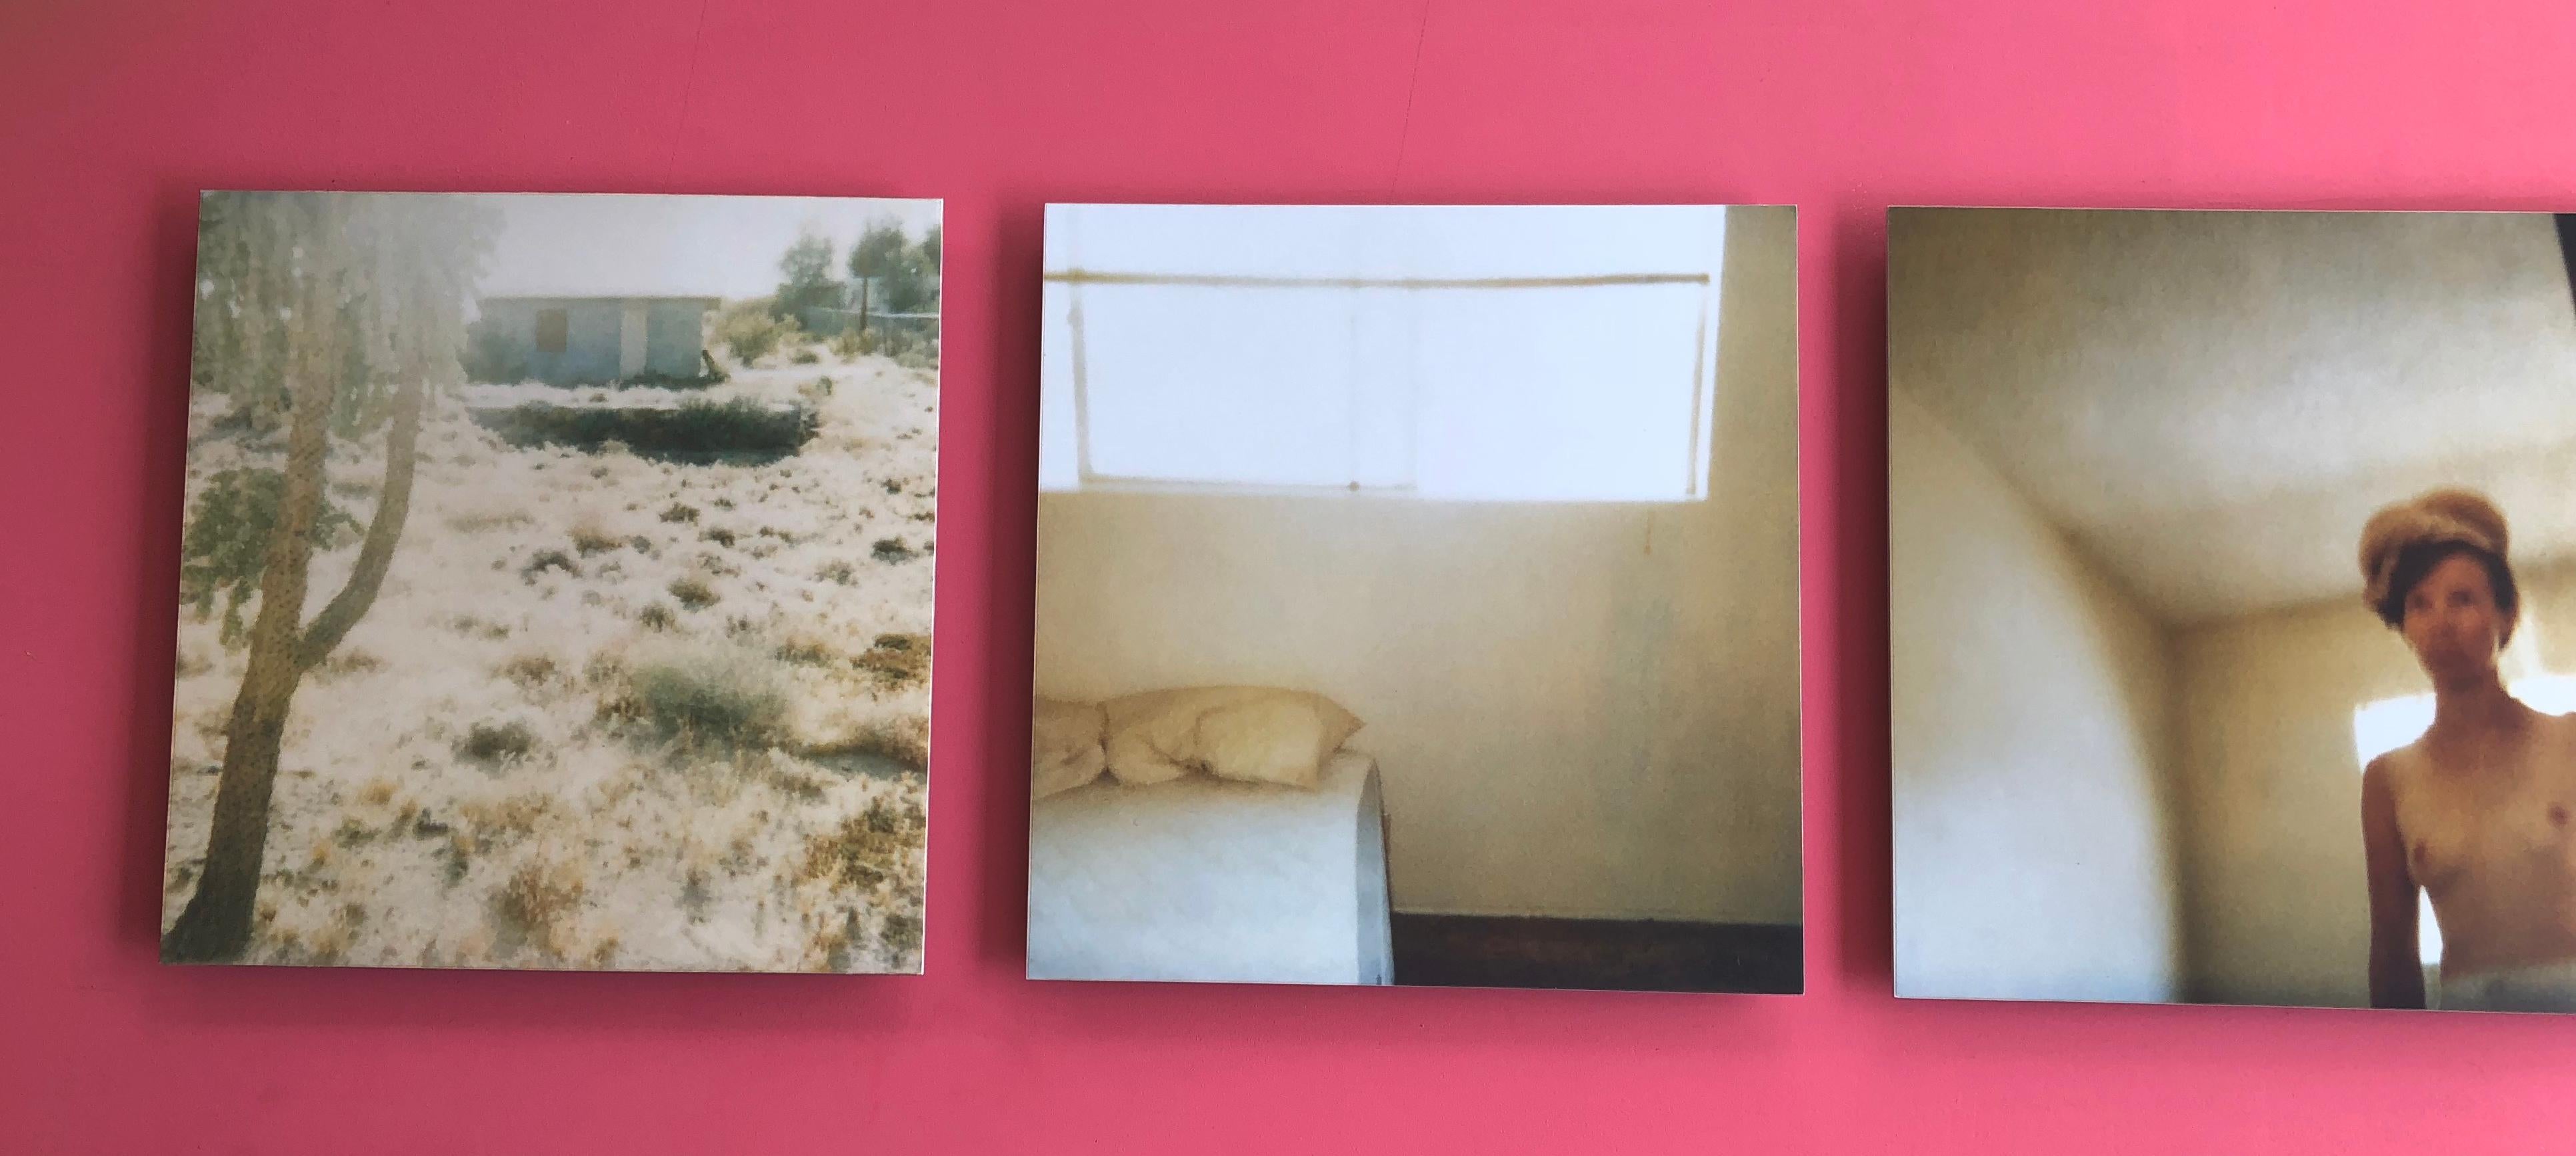 Blue House - Contemporary, 20th Century, Polaroid, Figurative Photography, Nude - Beige Color Photograph by Stefanie Schneider